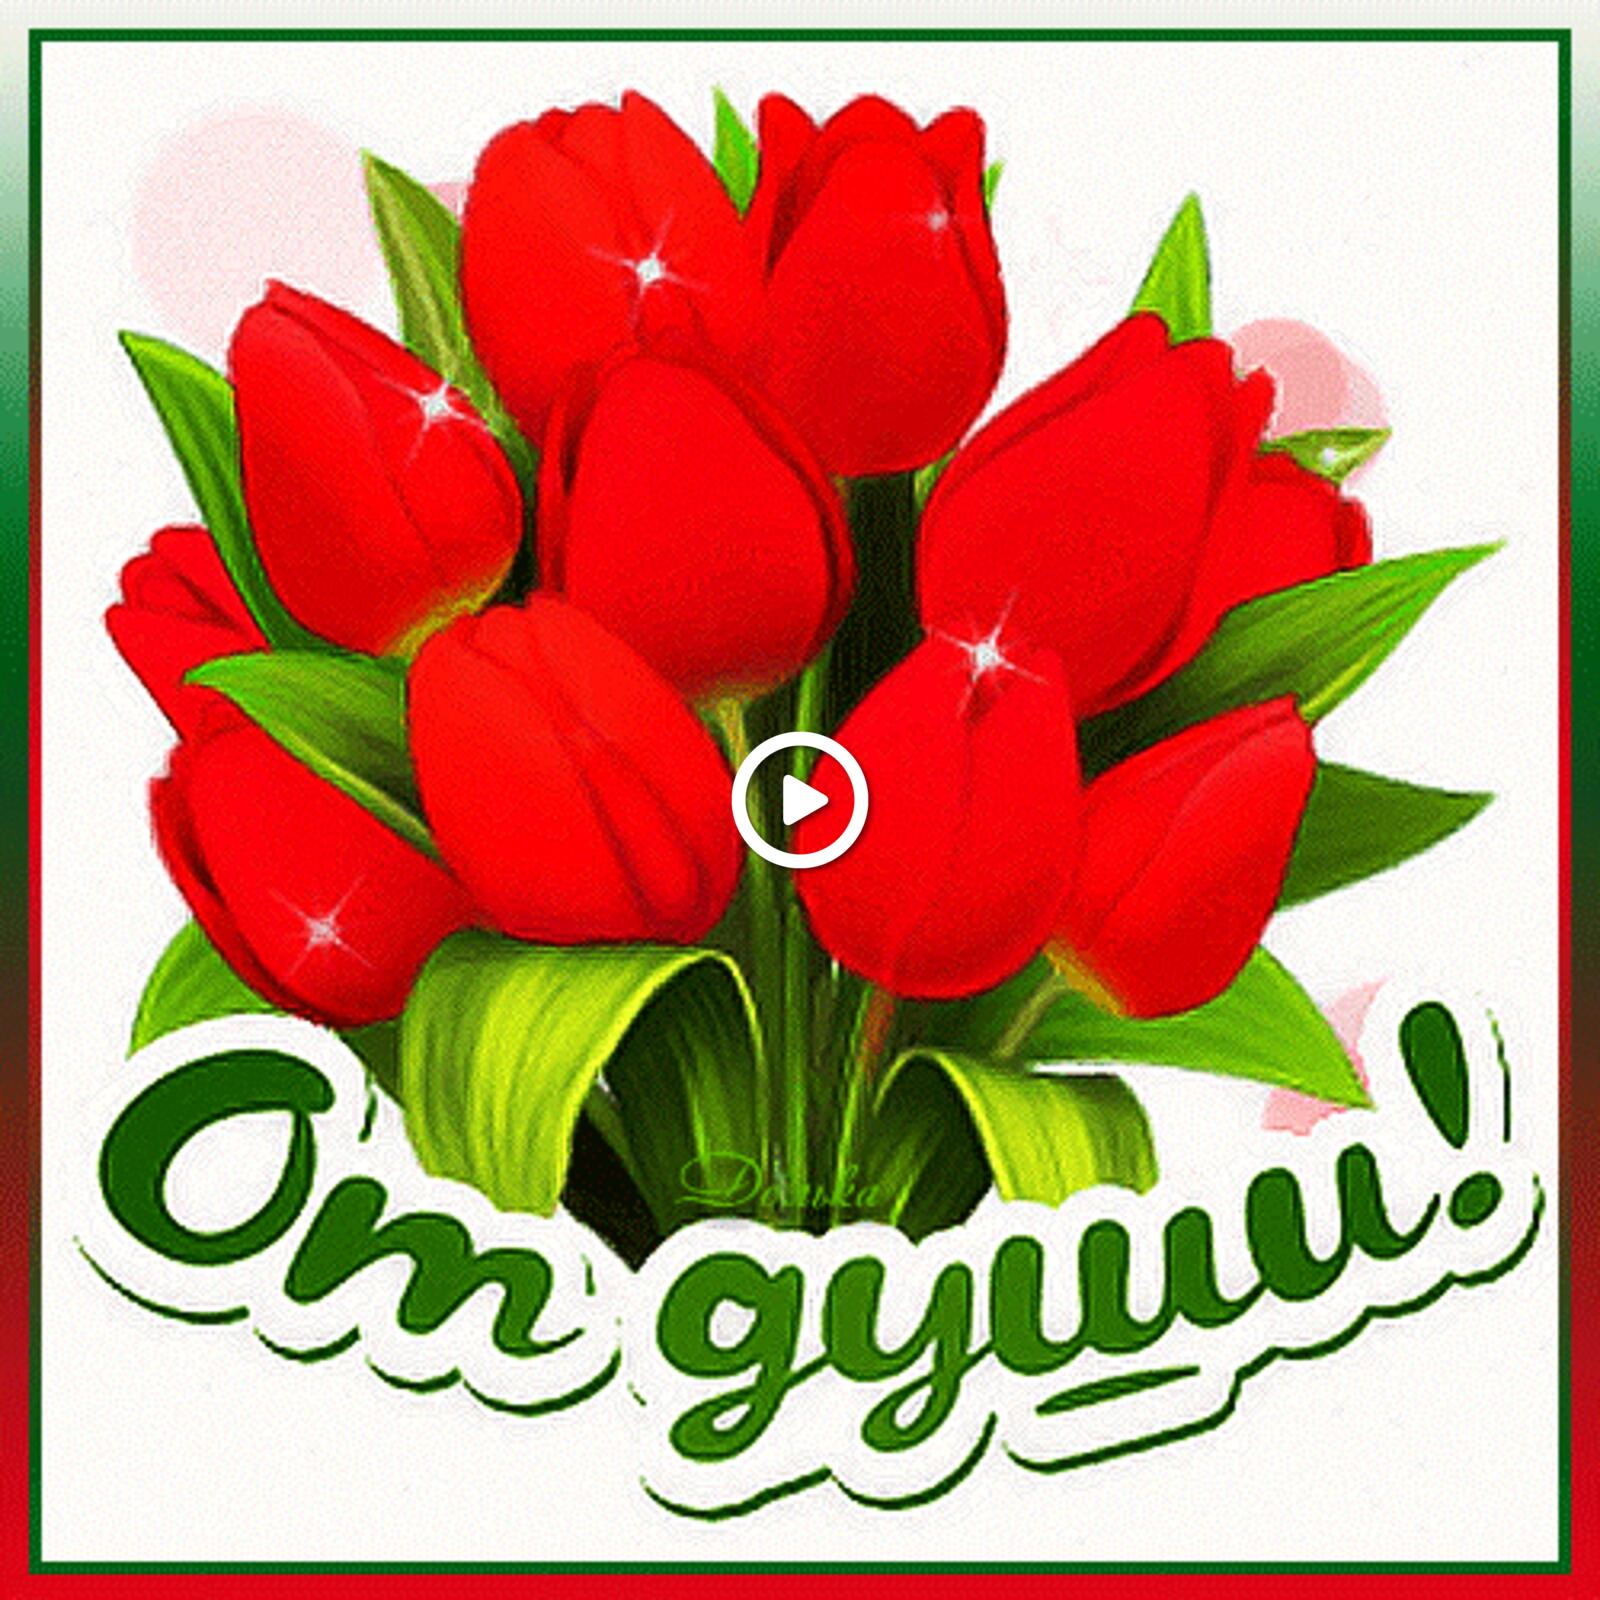 A postcard on the subject of heartily tulips bouquet for free